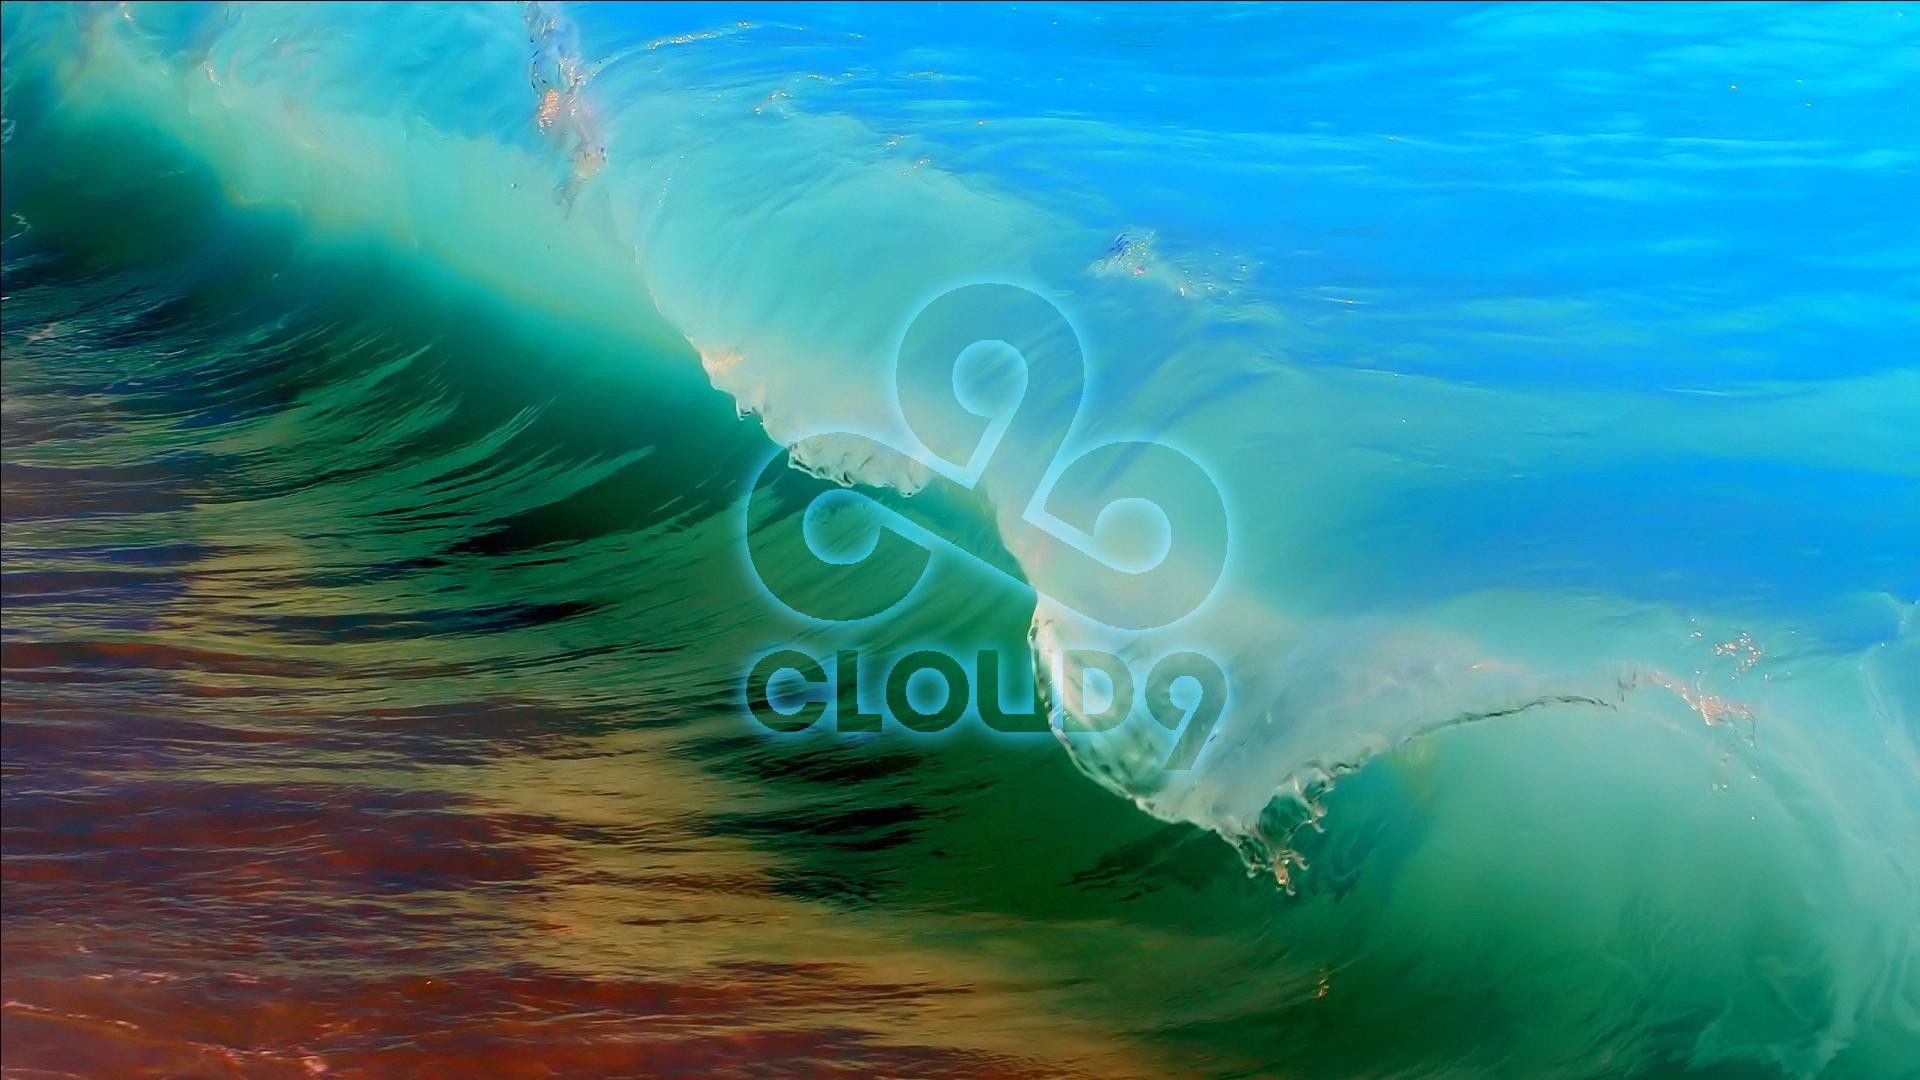 1920x1080 OtherFirst attempt at a simple cloud 9 wallpaper, thoughts?